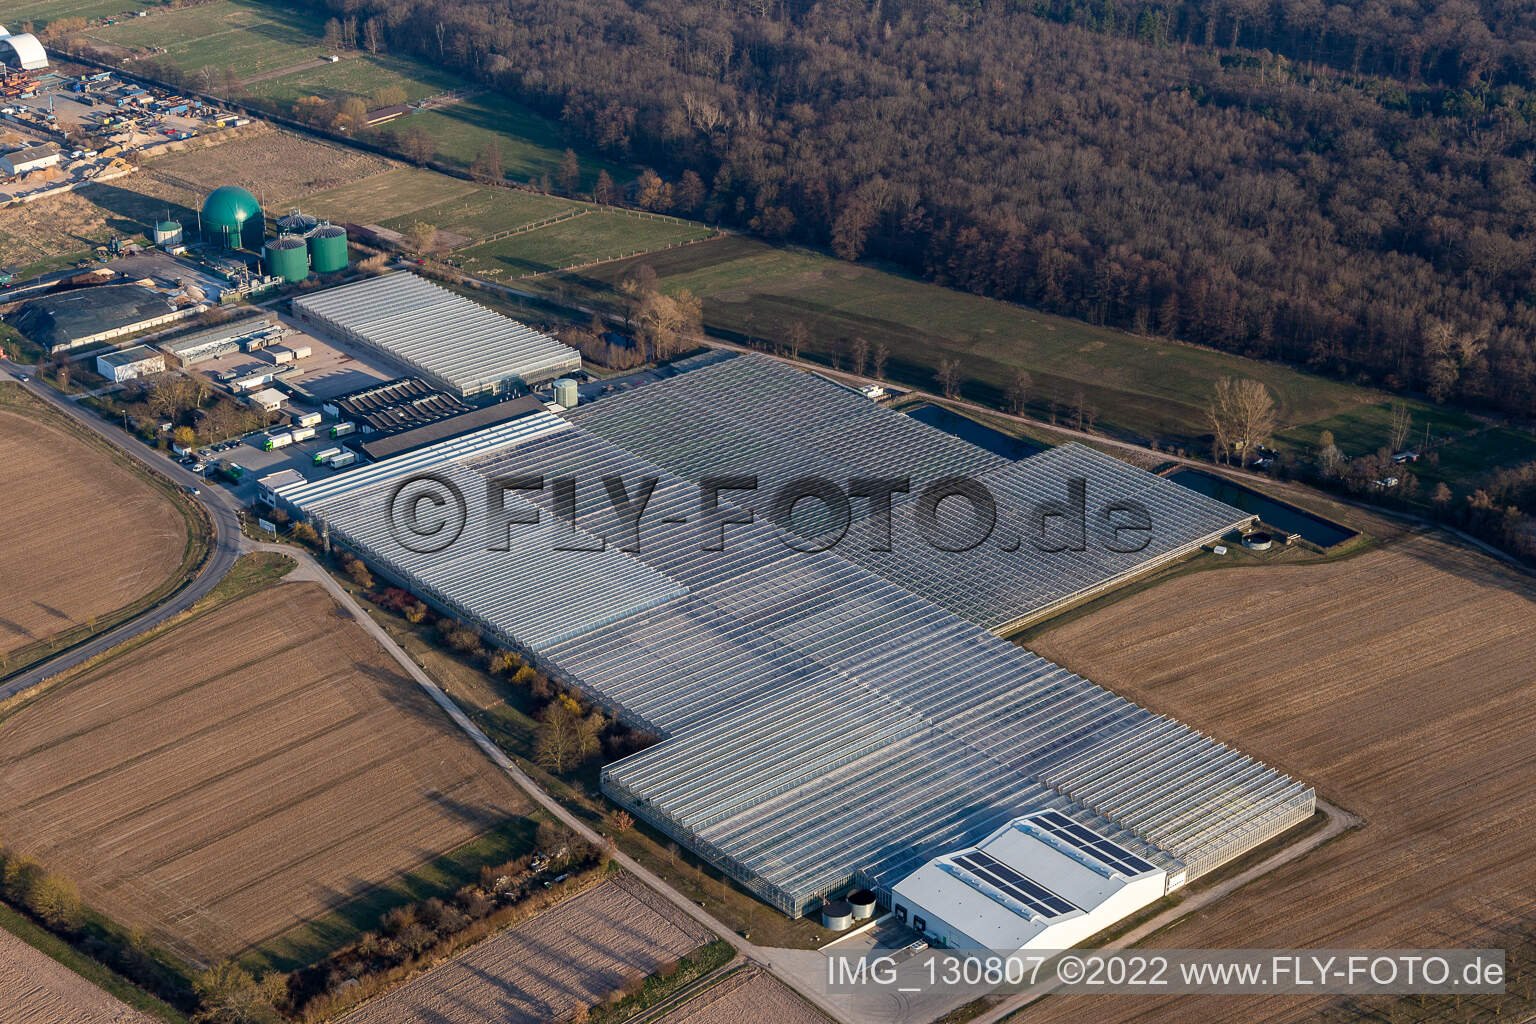 Aerial view of Rudolf Sinn Jungpflanzen GmbH & Co. KG in Lustadt in the state Rhineland-Palatinate, Germany